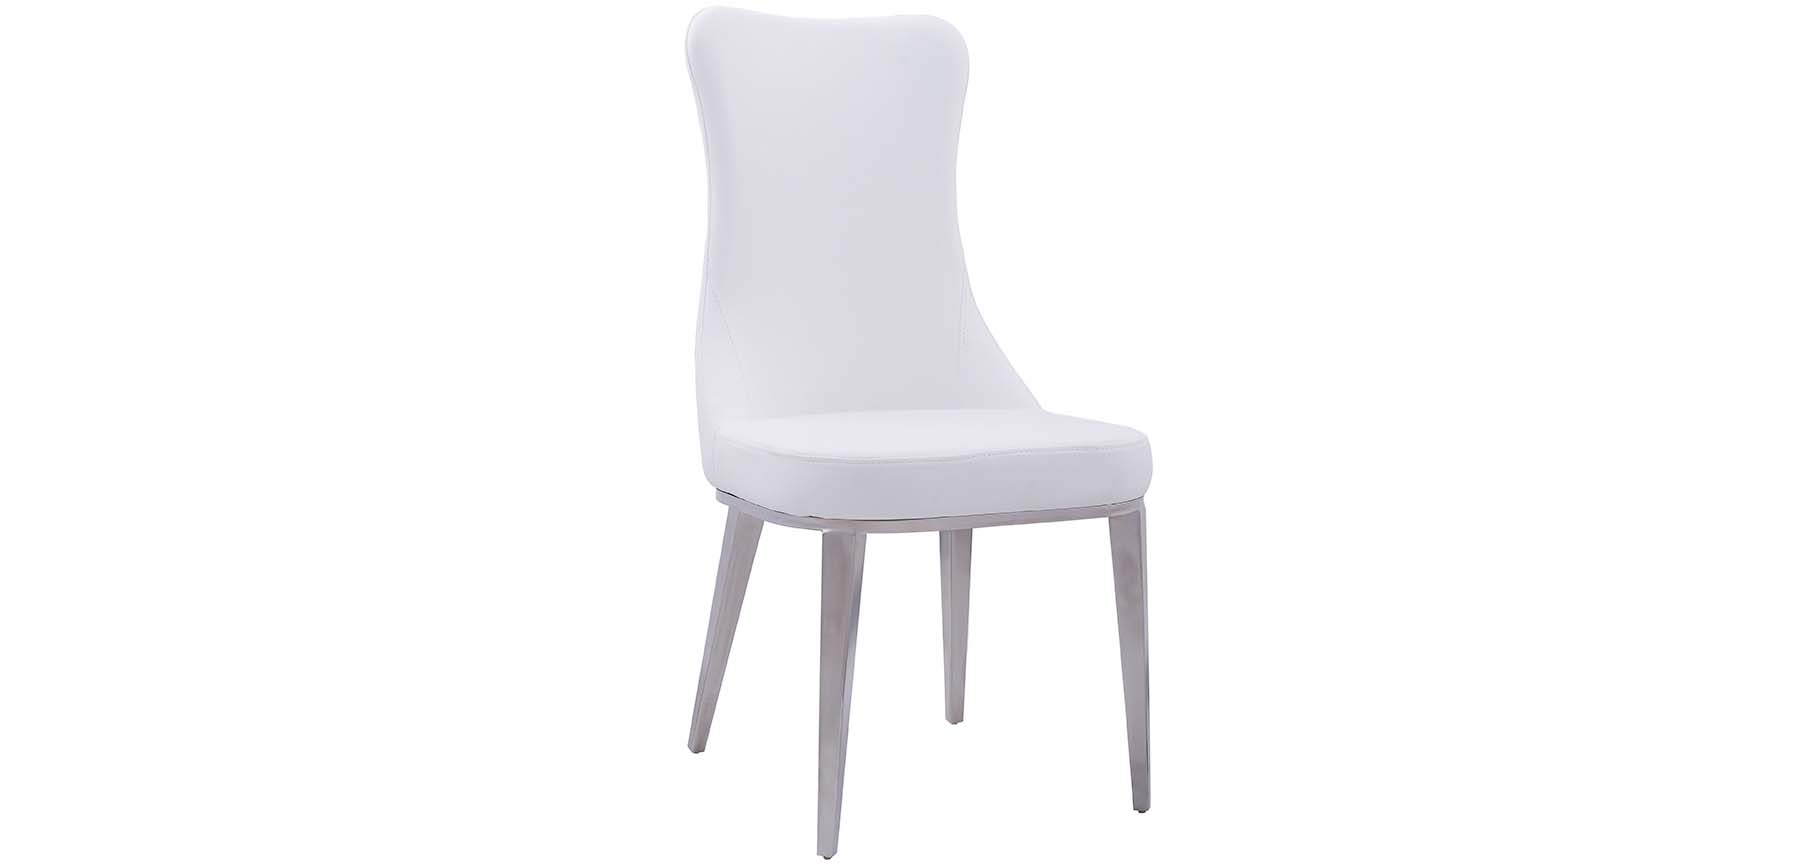 Dining Room Furniture Modern Dining Room Sets 6138 Solid White (no pattern) Chair